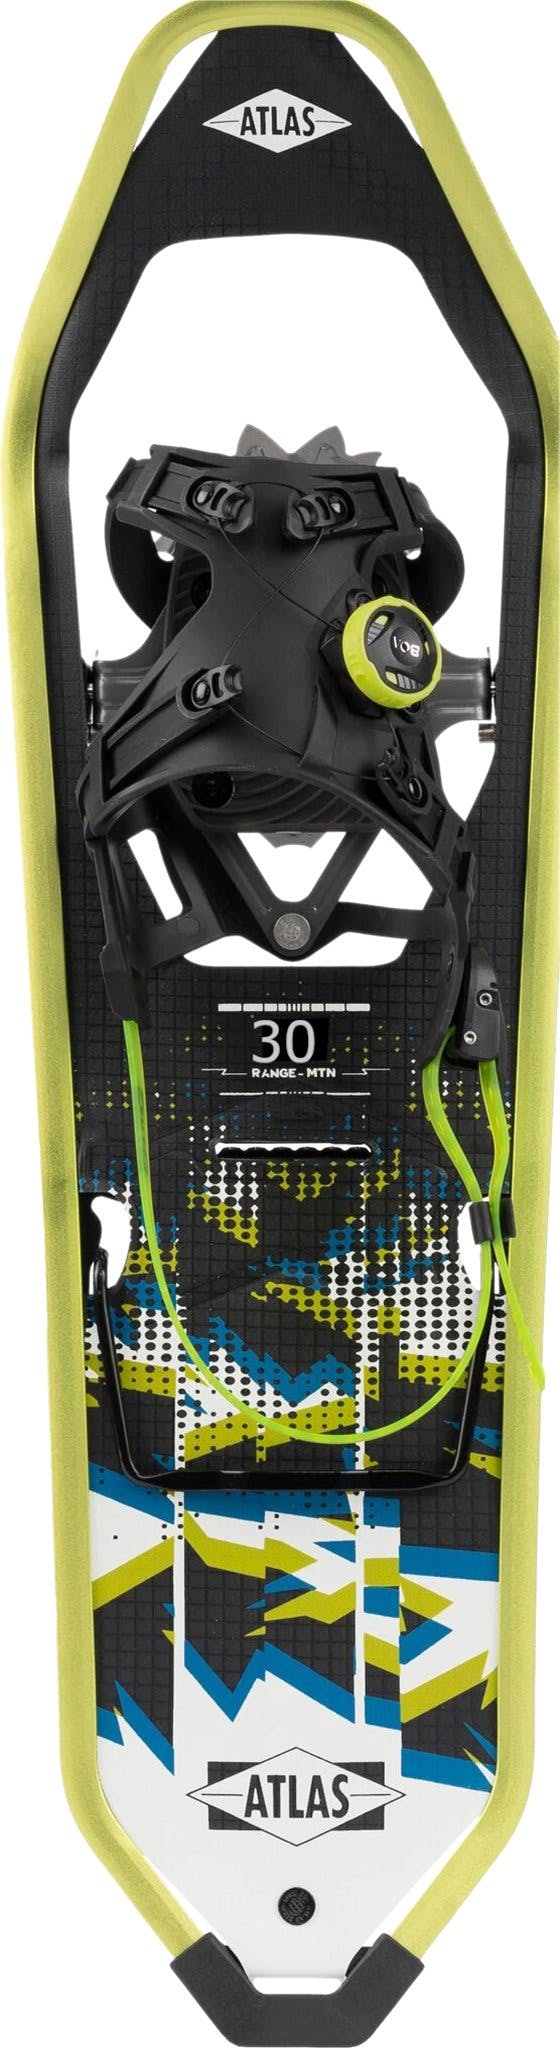 Product image for Range-MTN 30 inches All-mountain Snowshoes - Men's